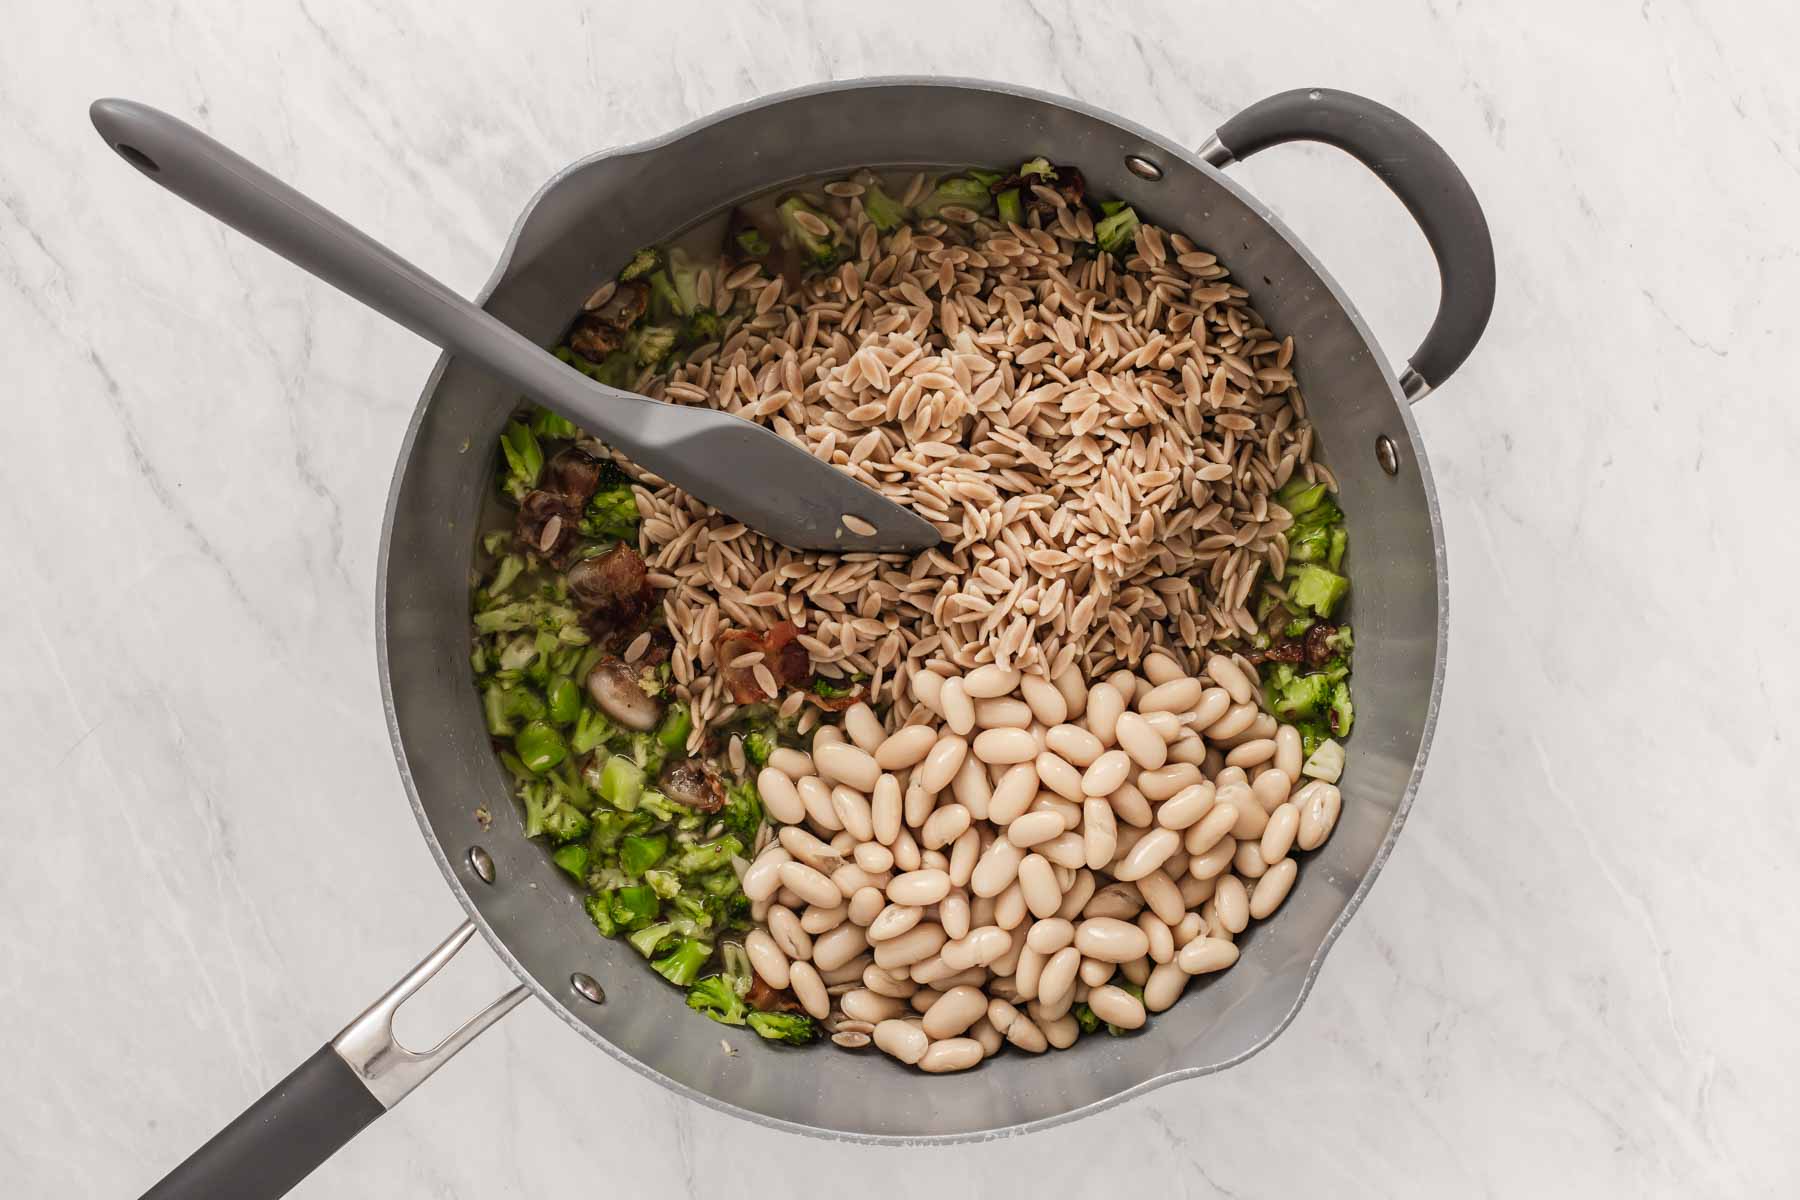 Stirring orzo and white beans into skillet with broccoli.